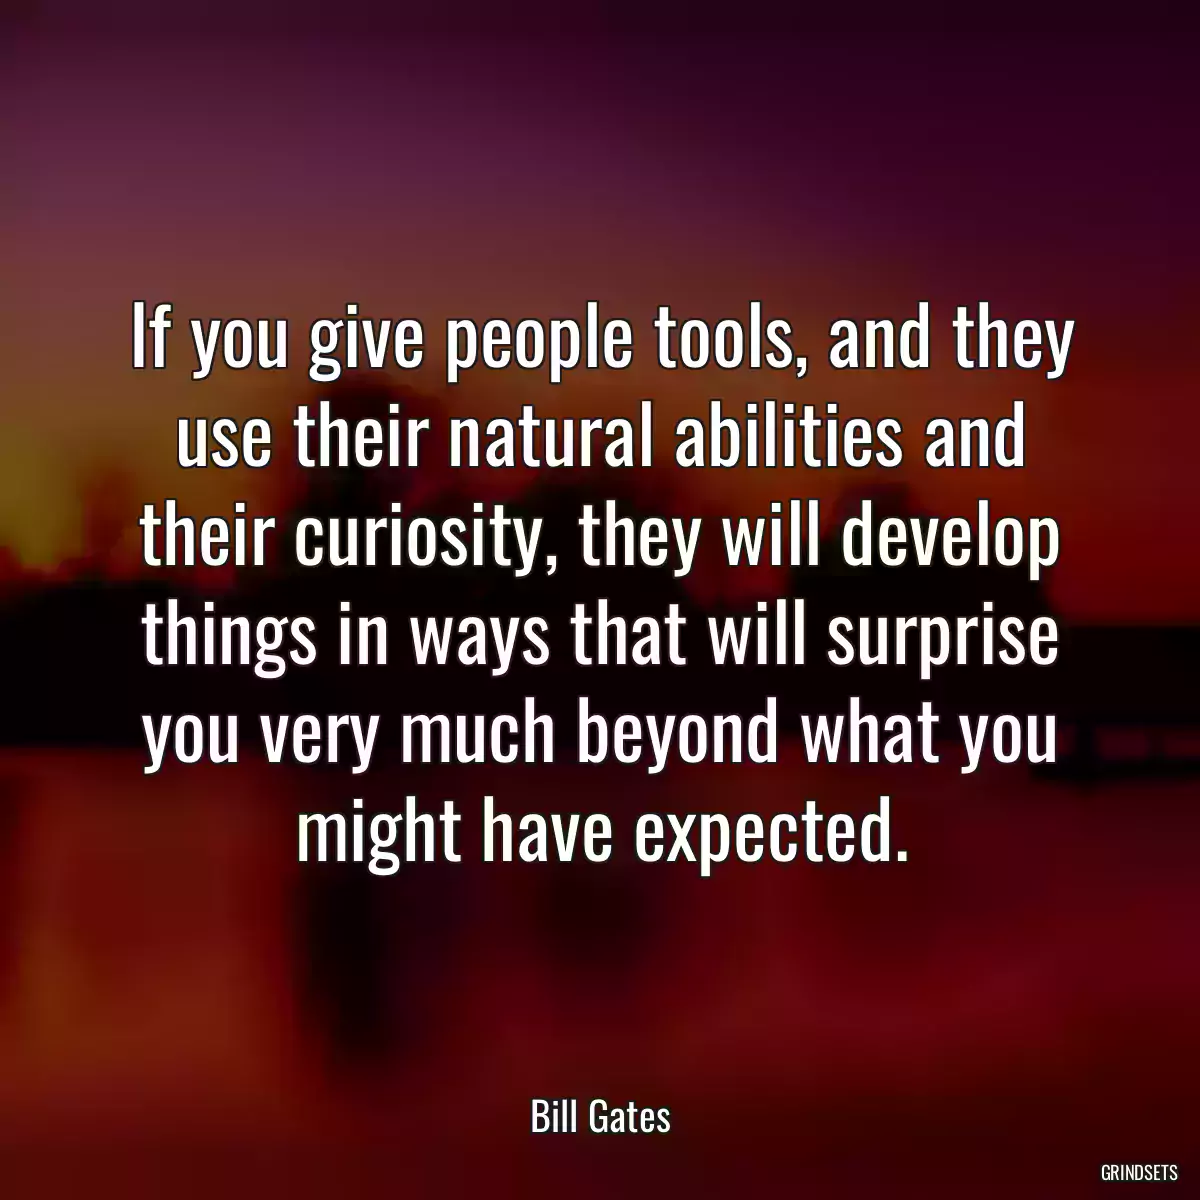 If you give people tools, and they use their natural abilities and their curiosity, they will develop things in ways that will surprise you very much beyond what you might have expected.